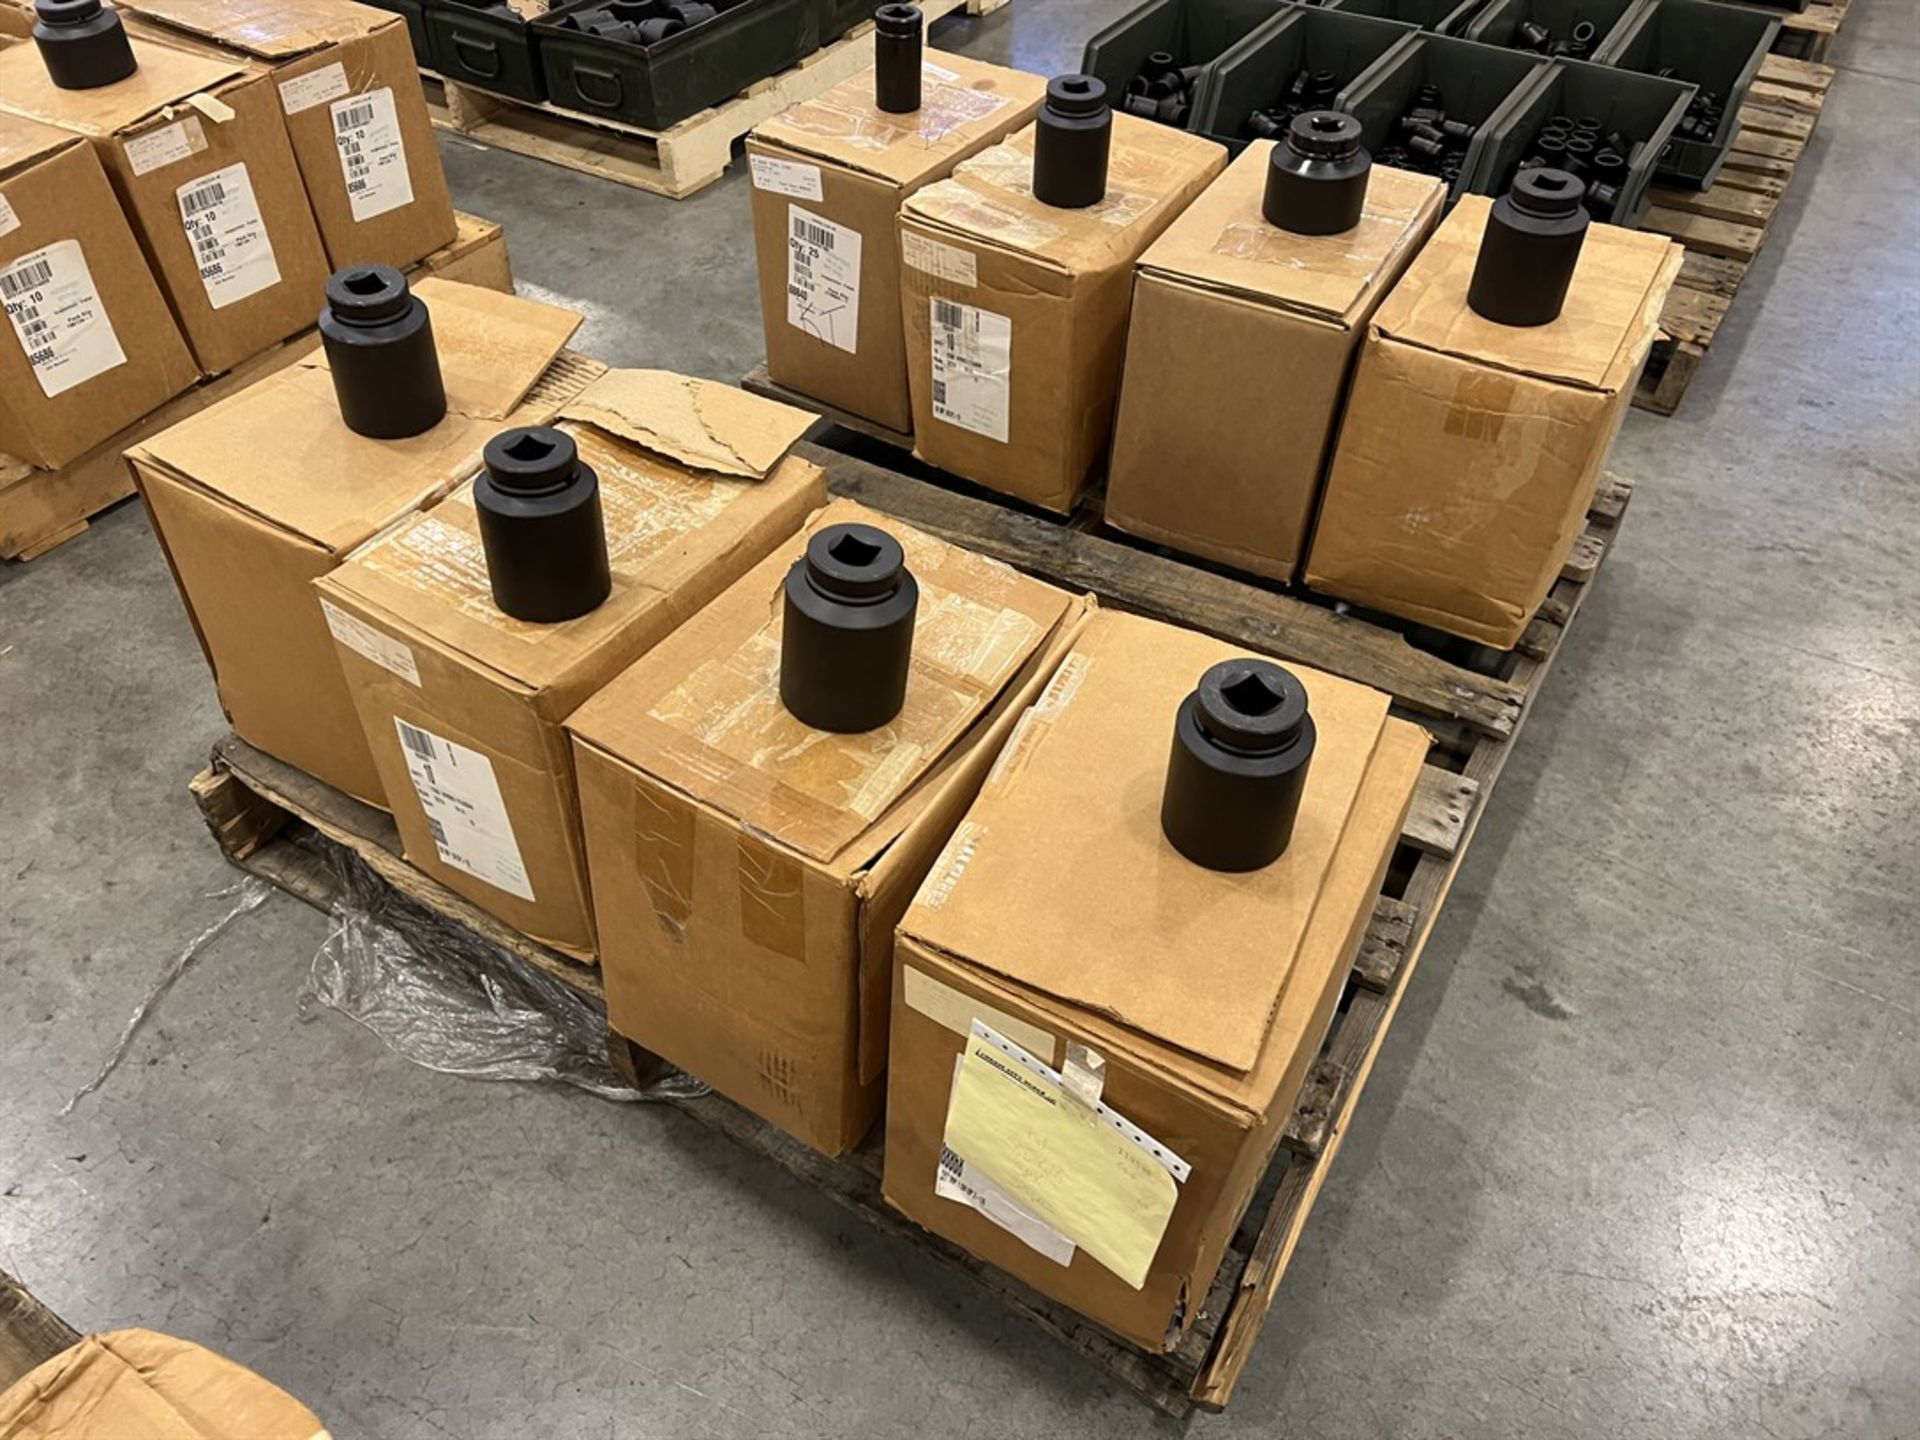 Pallet of 1" Drive Impact Sockets from 1-1/4" to 2-3/4"